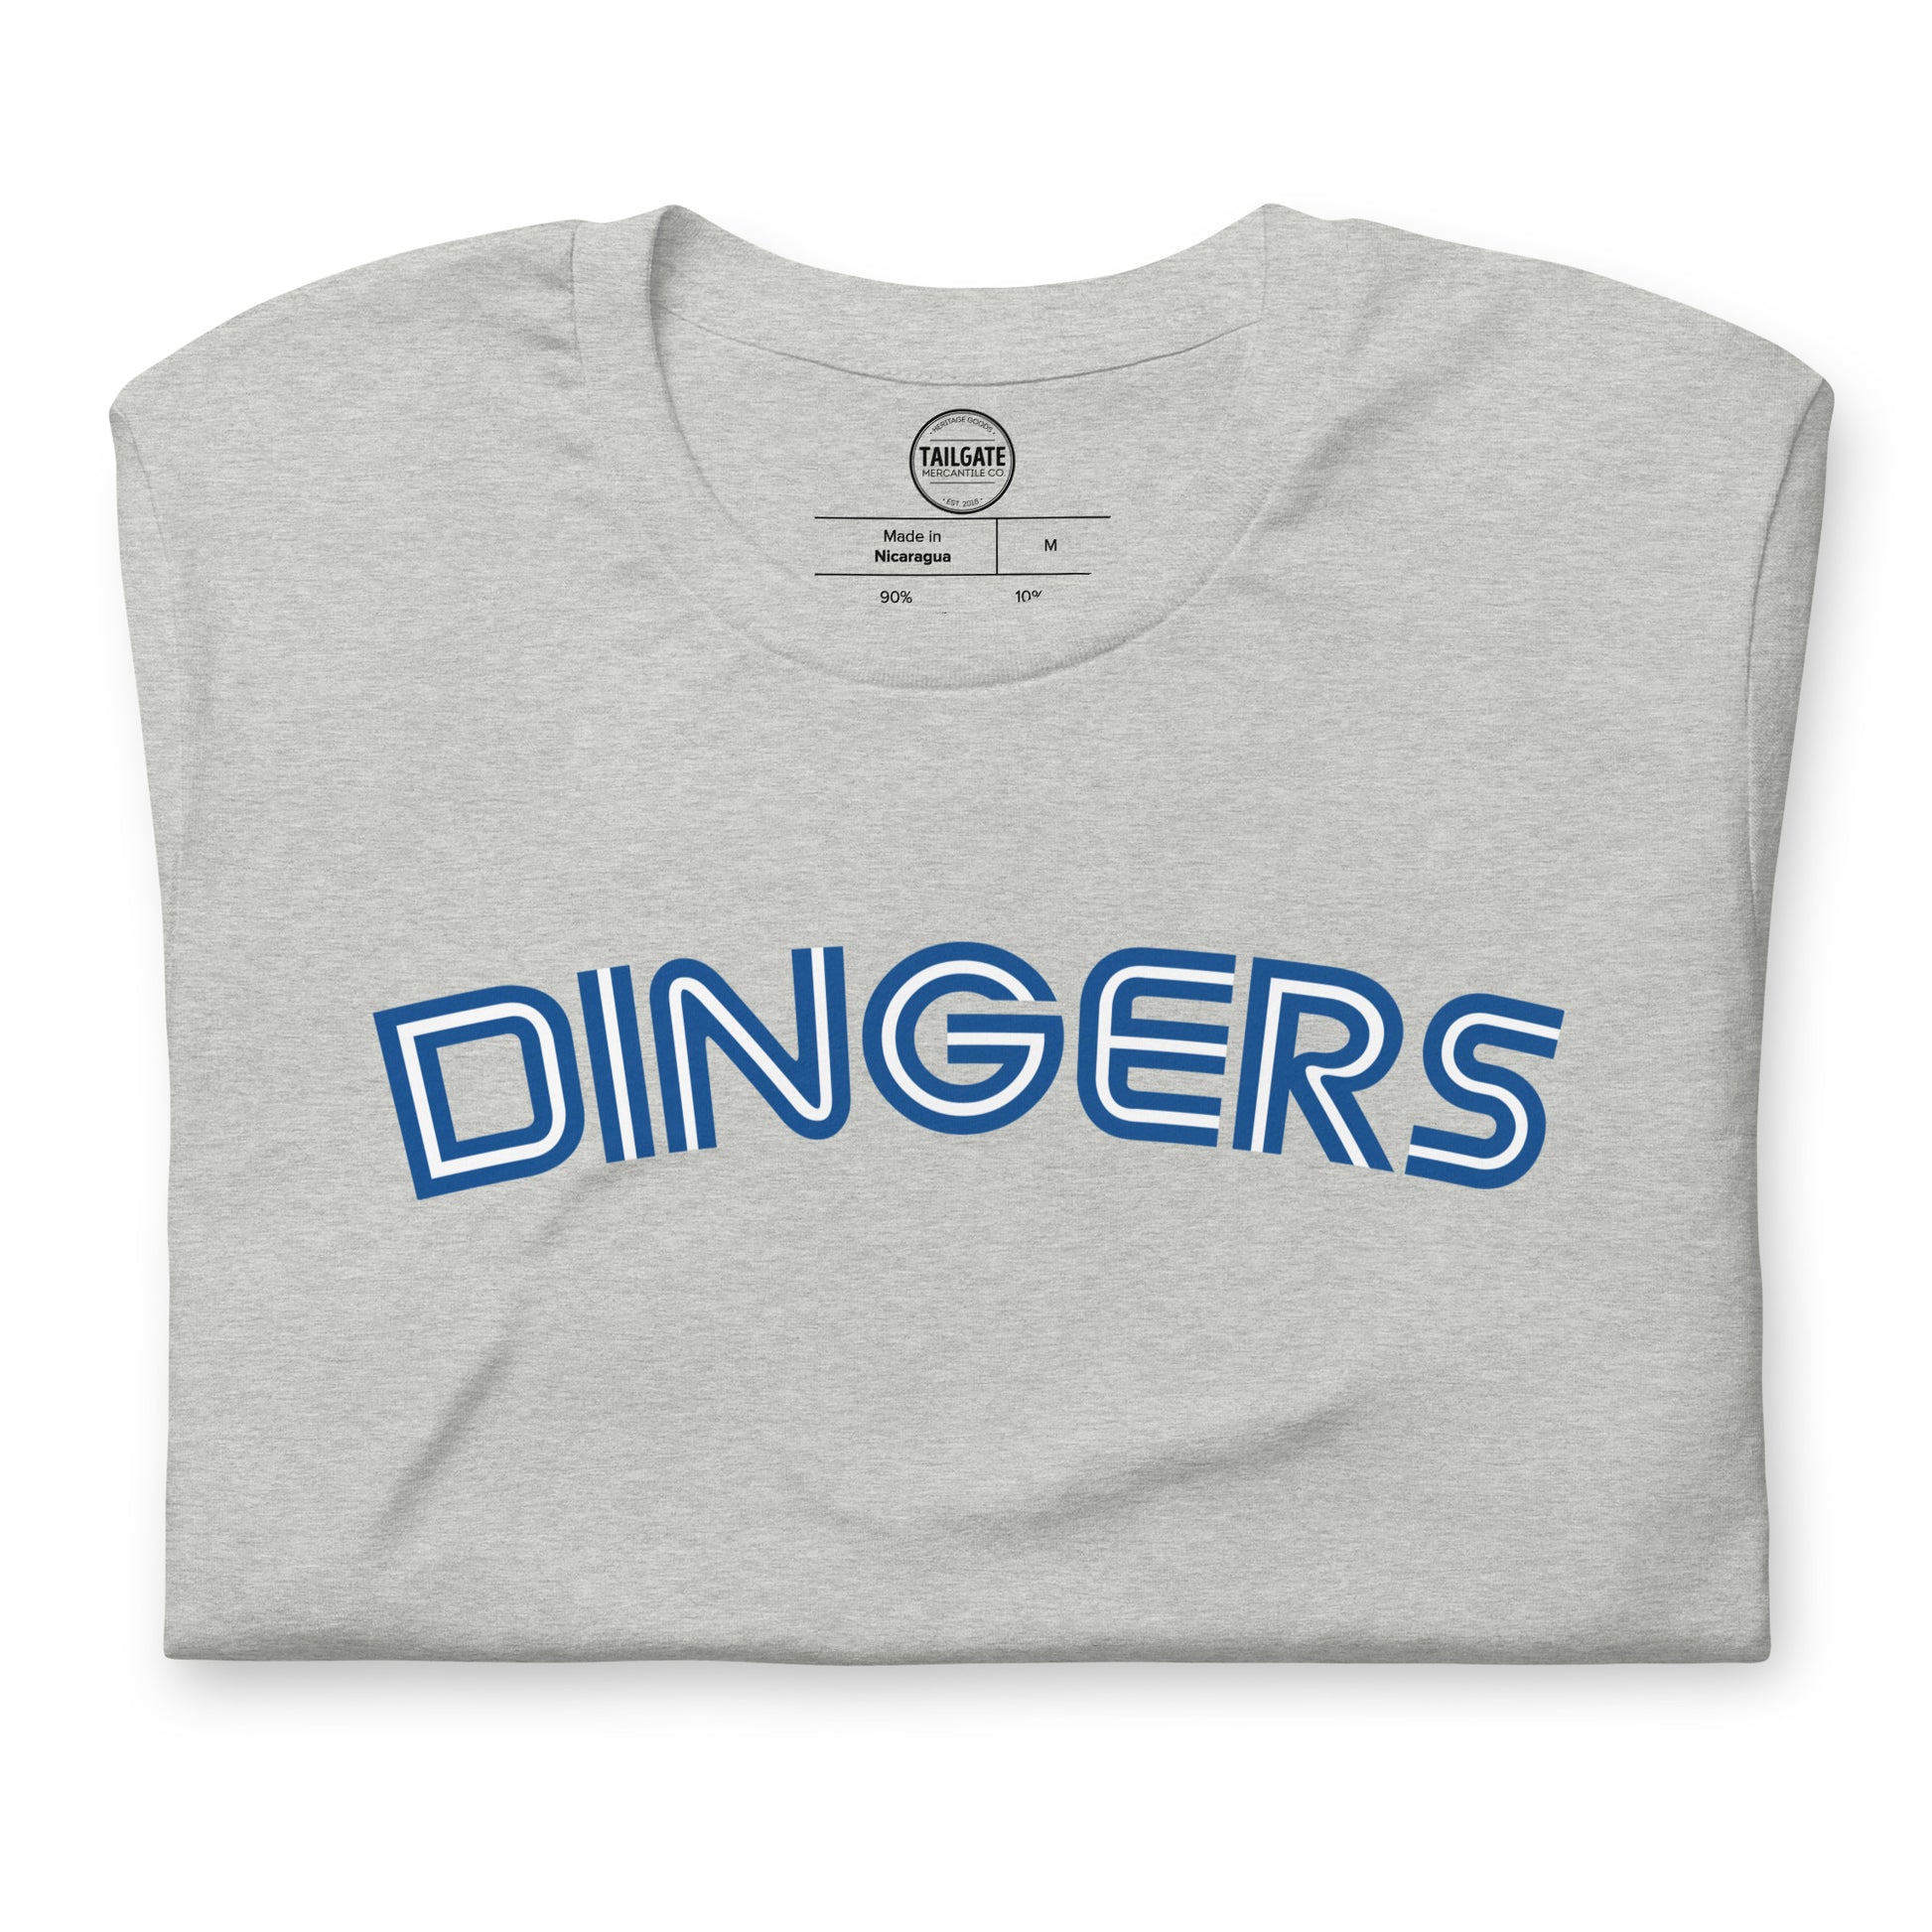 Close up image of heather athletic grey t-shirt with design of "DINGERS" in Toronto Blue Jays retro blue style font located on centre chest. This design is exclusive to Tailgate Mercantile and available only online.